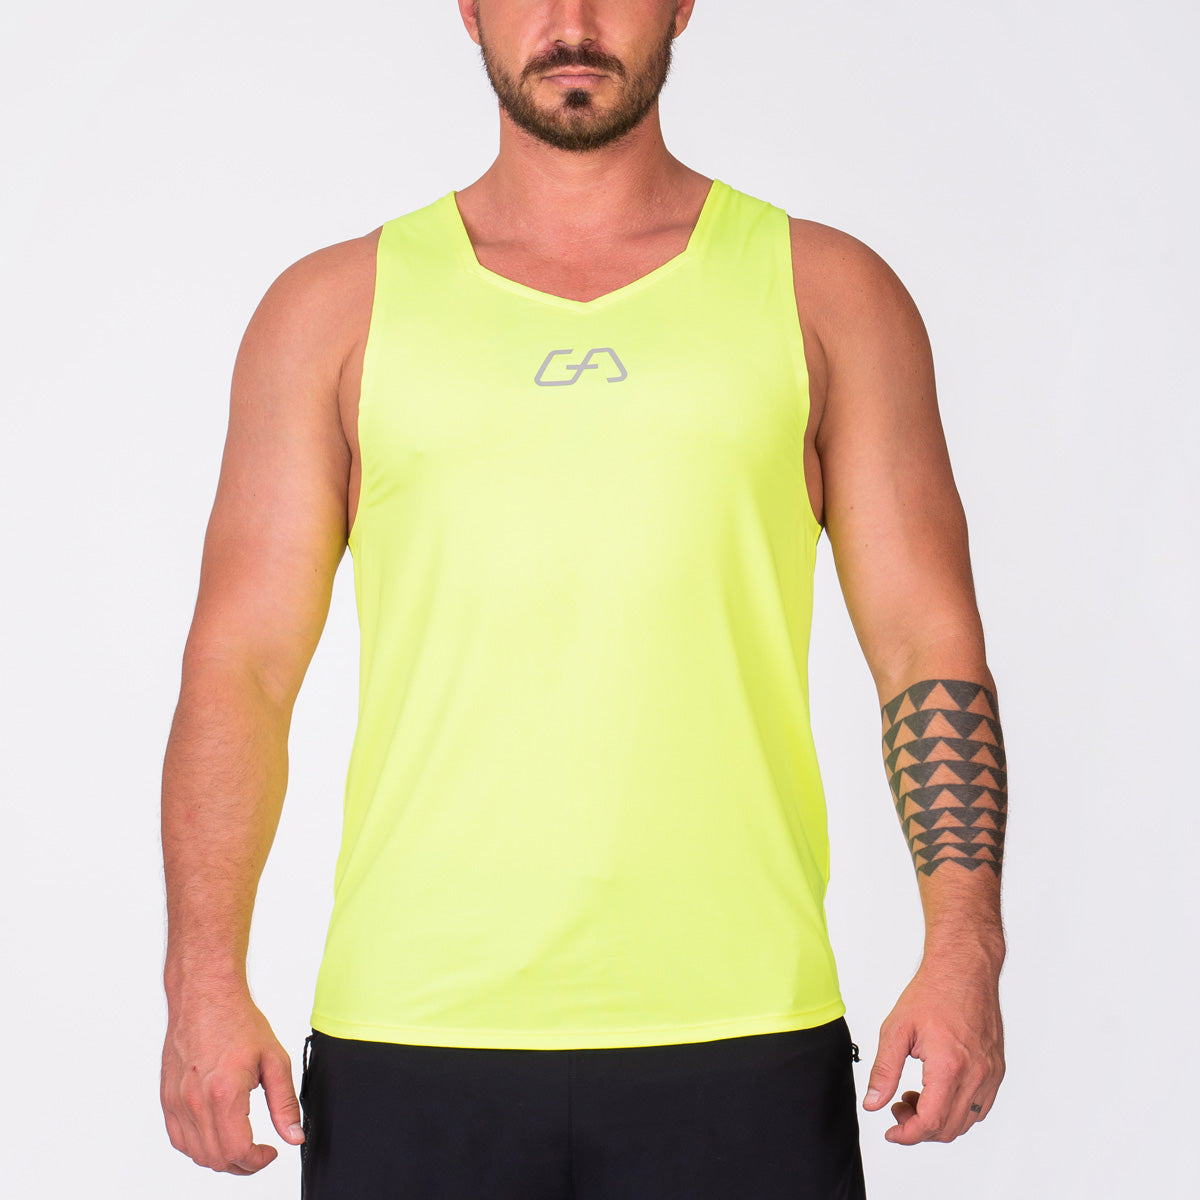 Essential Gym Tank Tops for Men